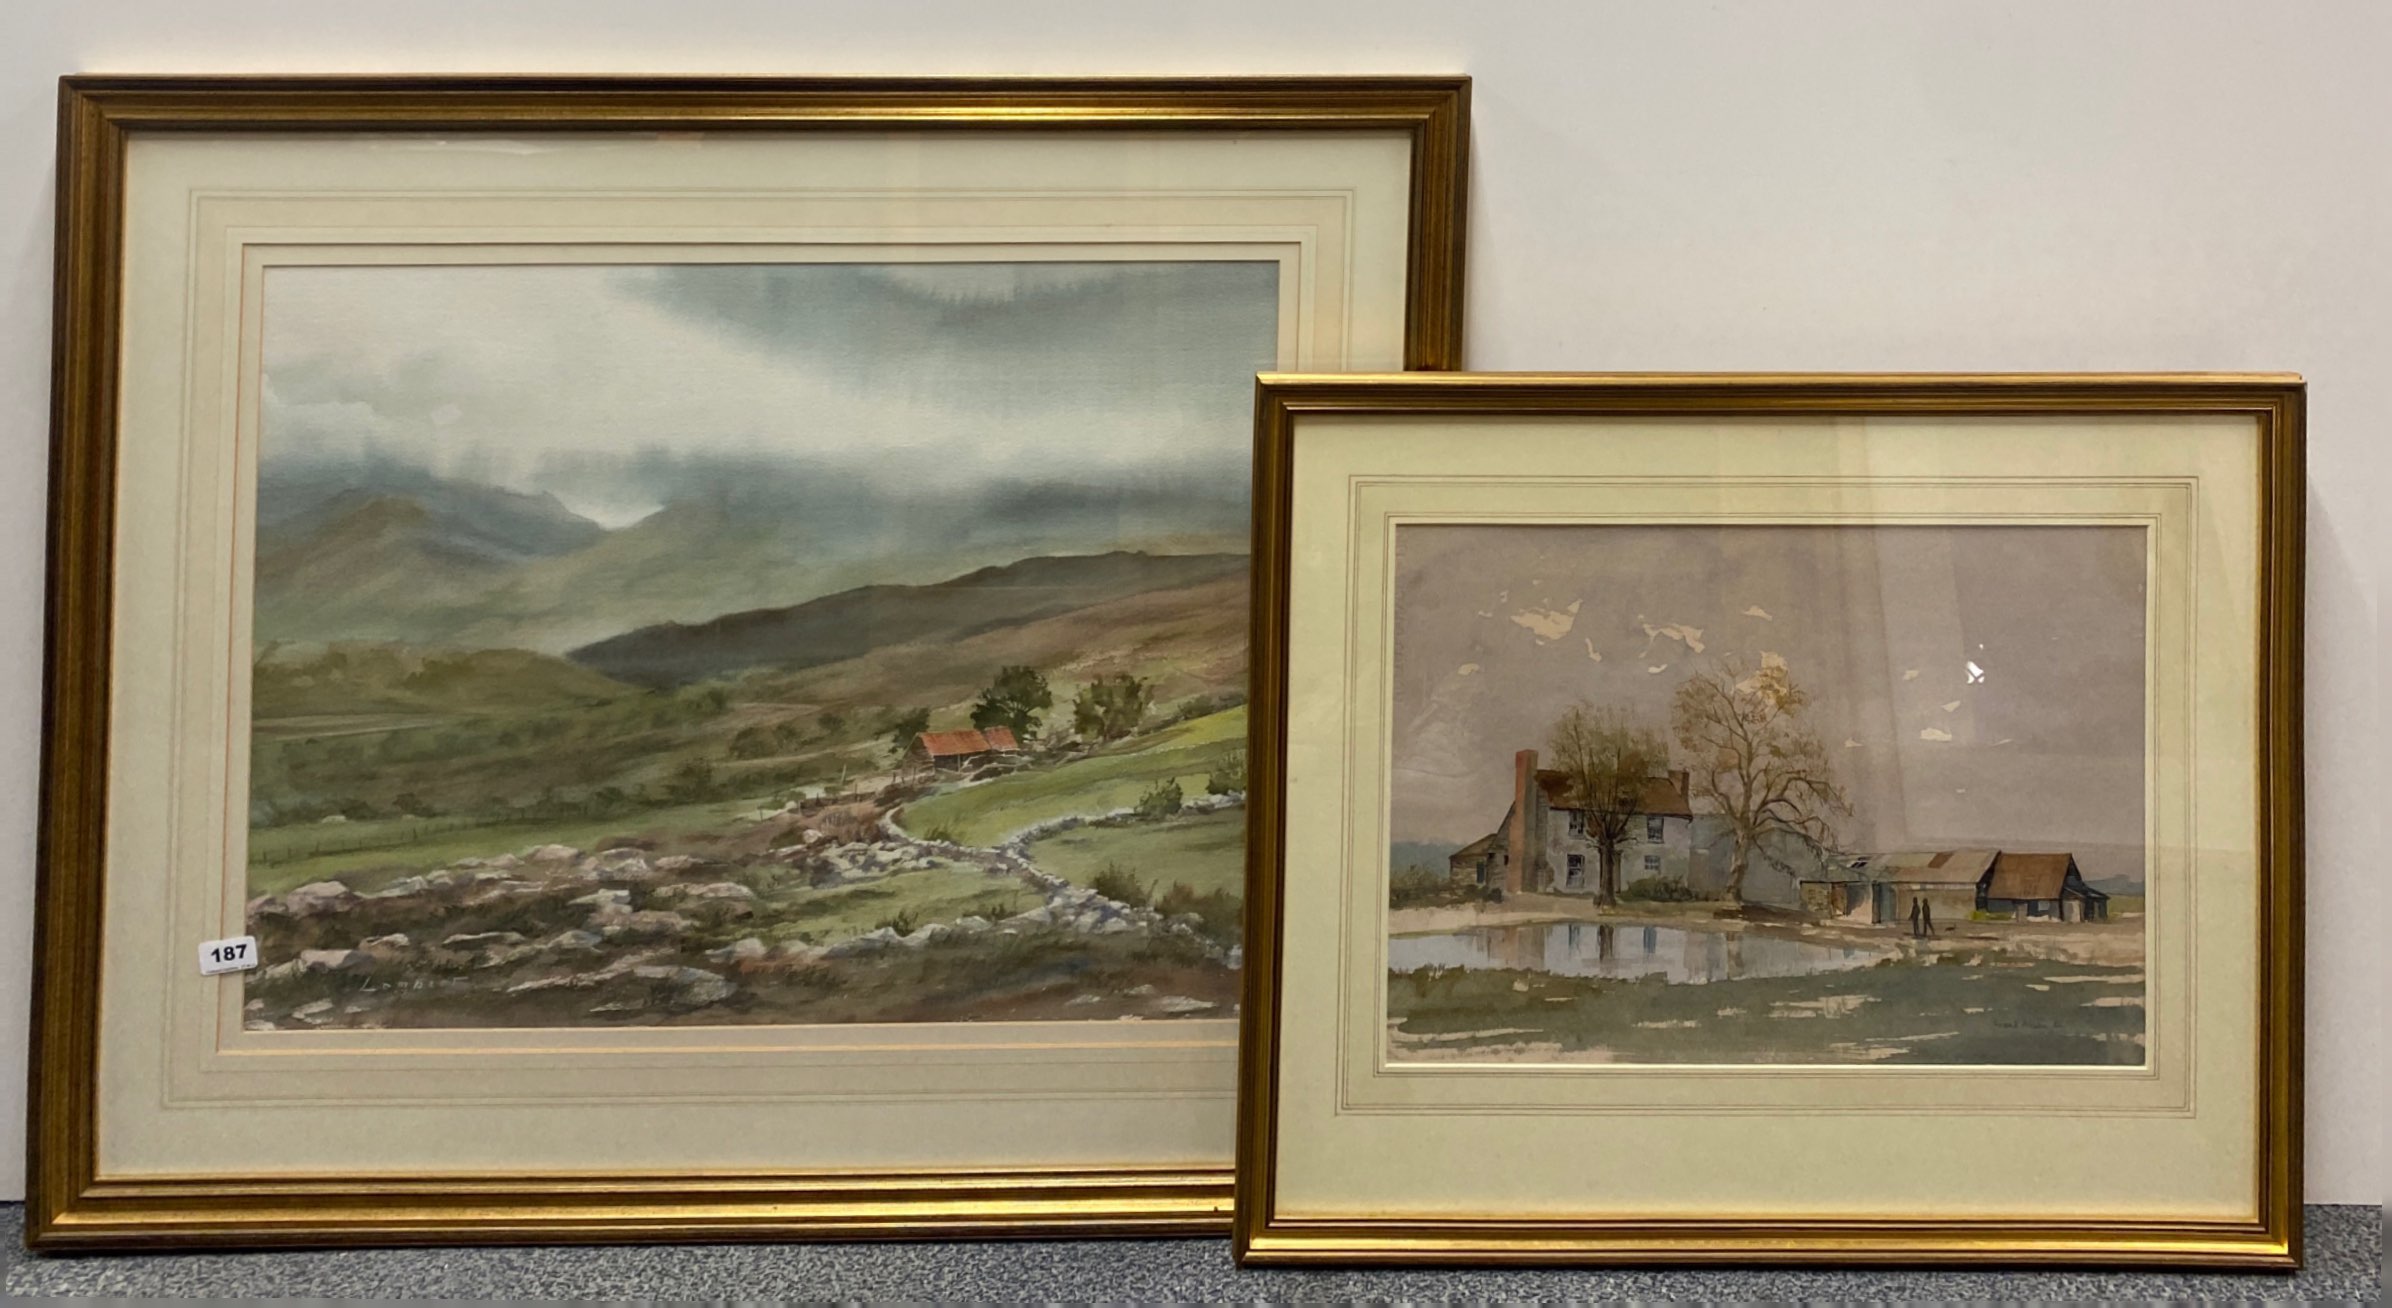 A large gilt framed watercolour landscape signed Lambert, frame size 78 x 95cm. together with a